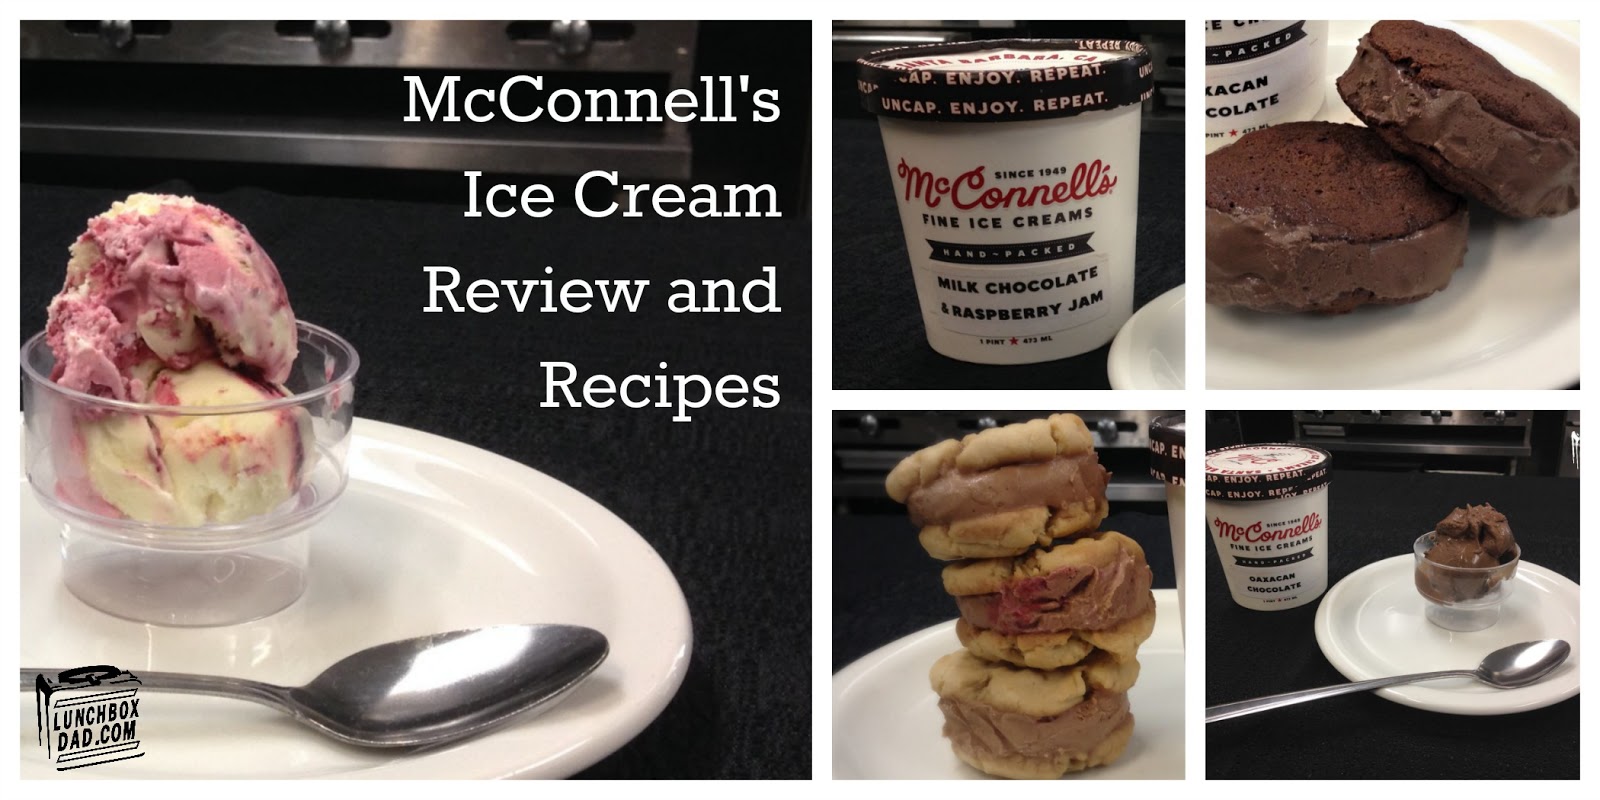 McConnell's Ice Cream Review